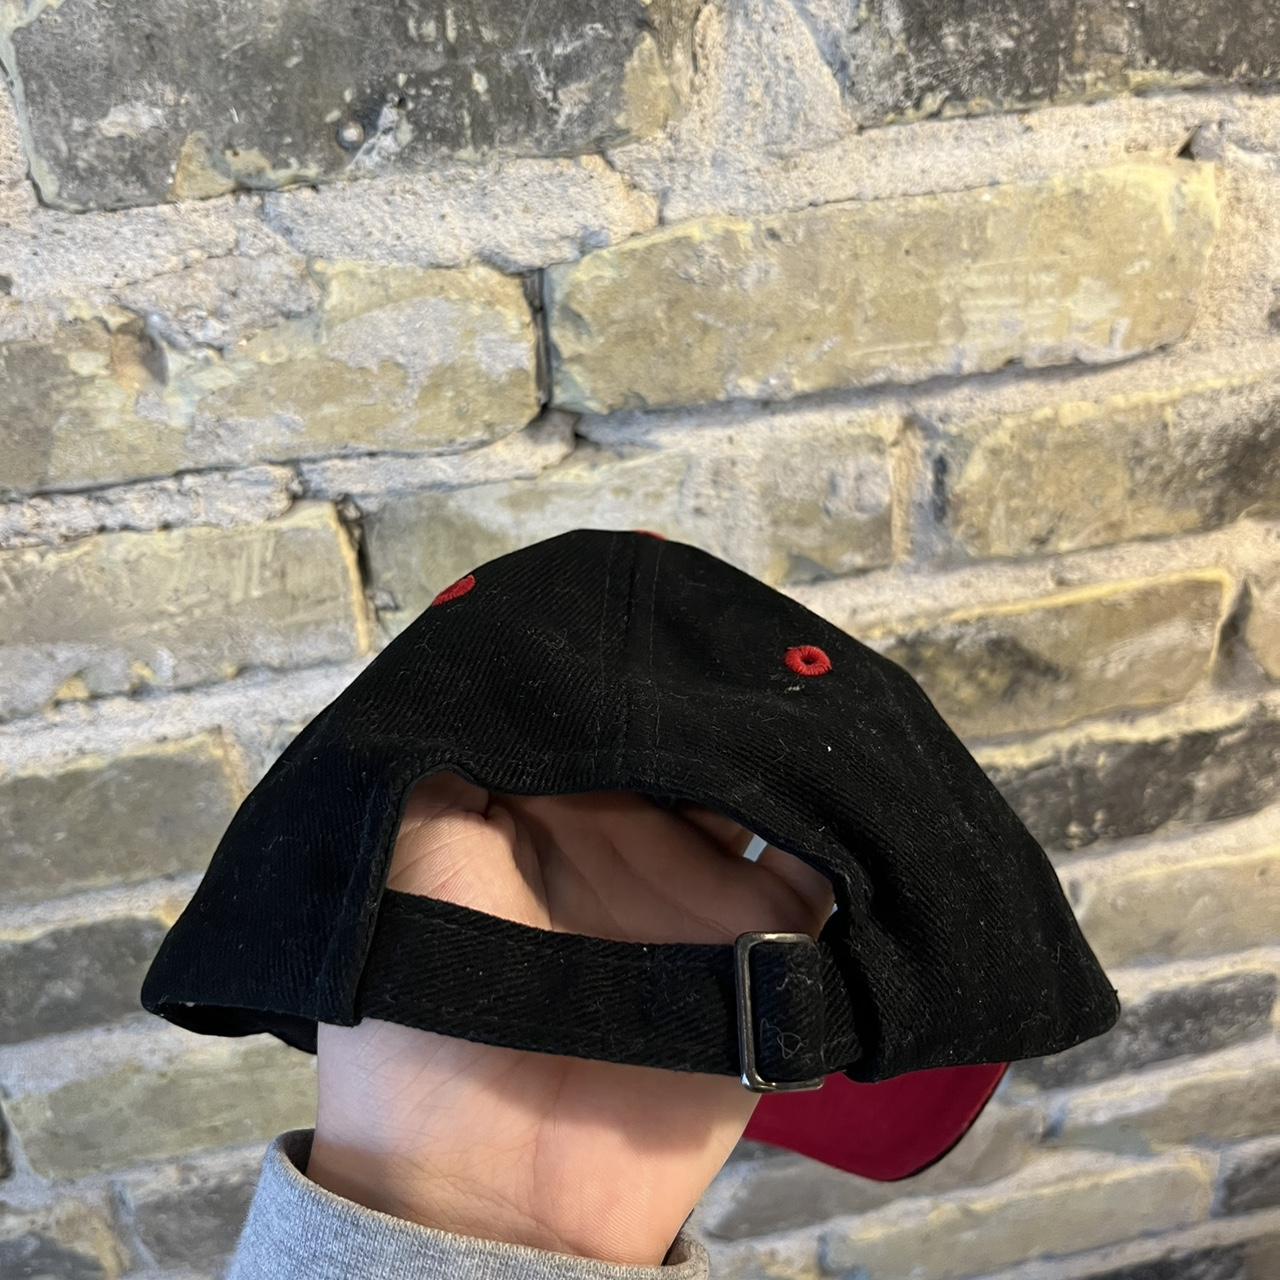 NBA Men's Black and Red Hat (2)